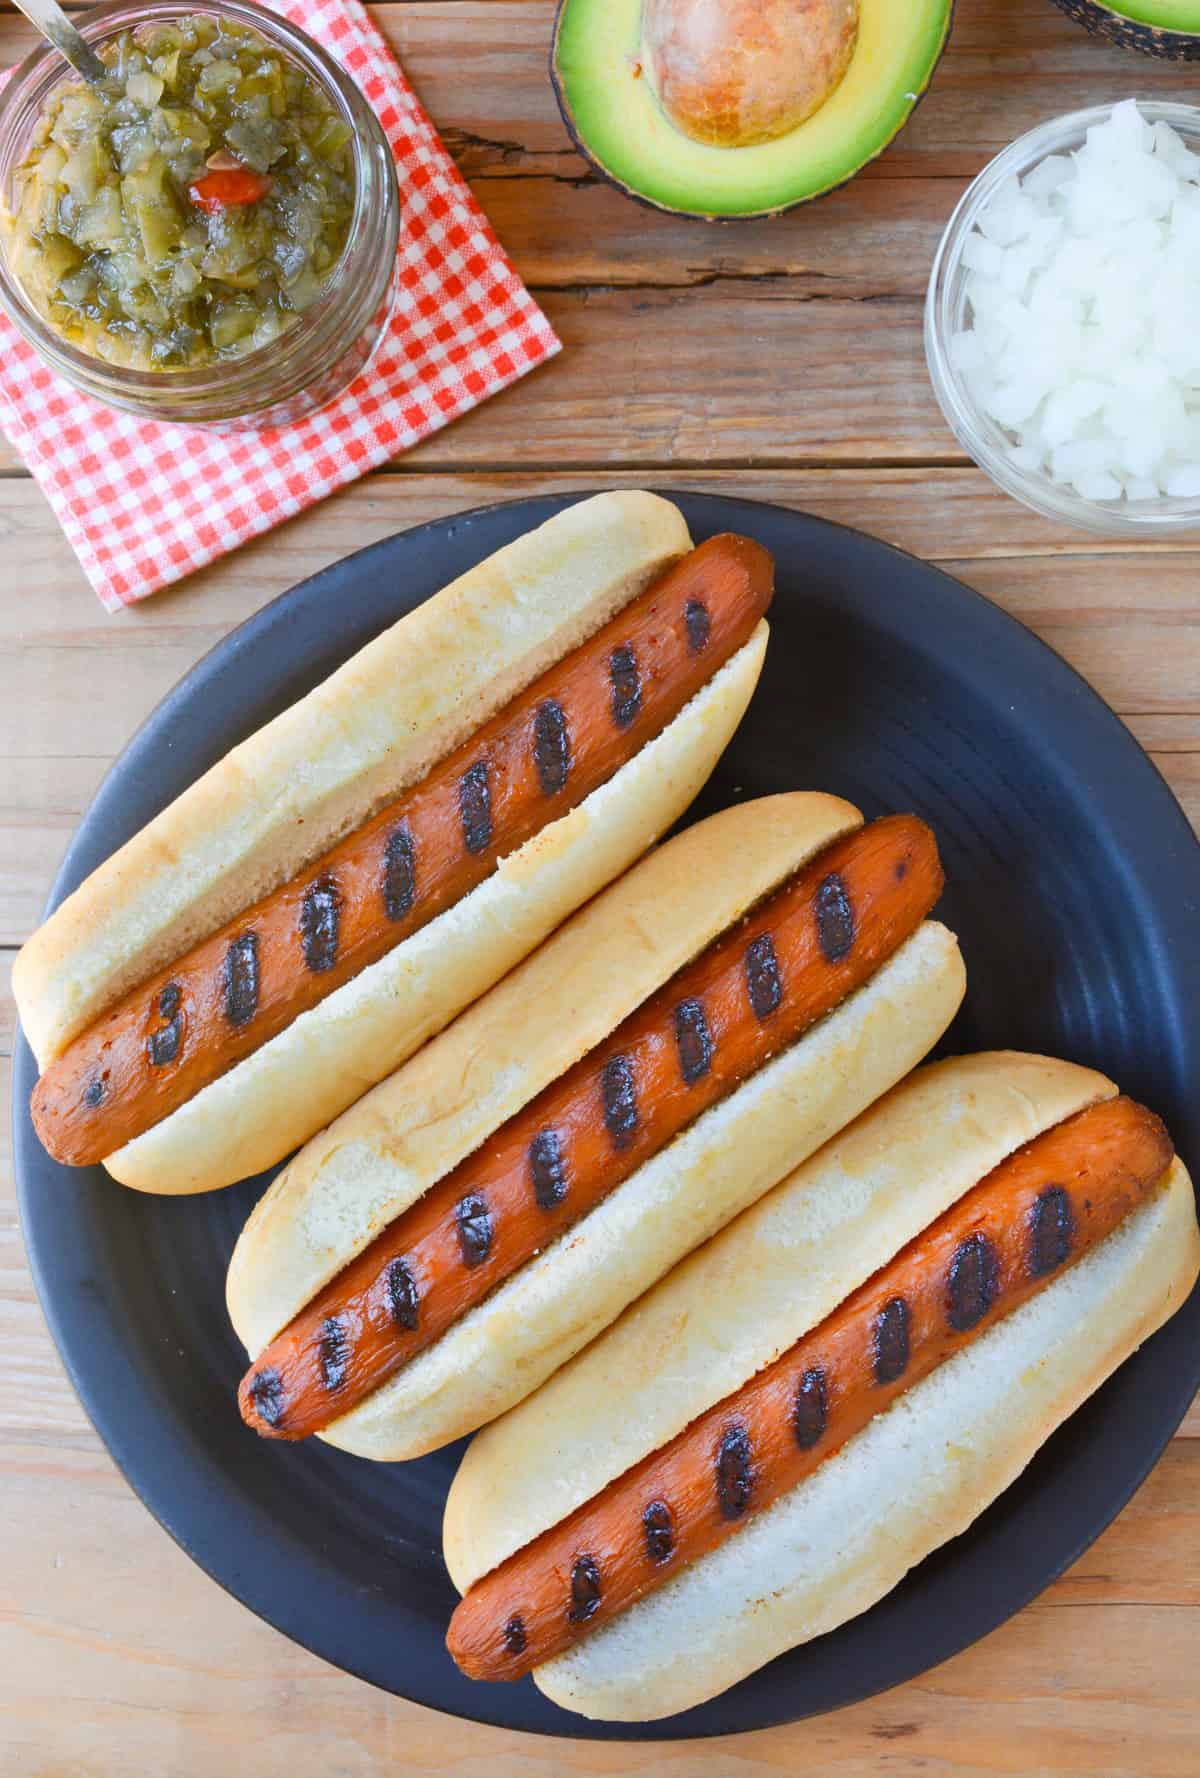 Three carrot hot dogs with grill lines in hot dog buns on a black plate.